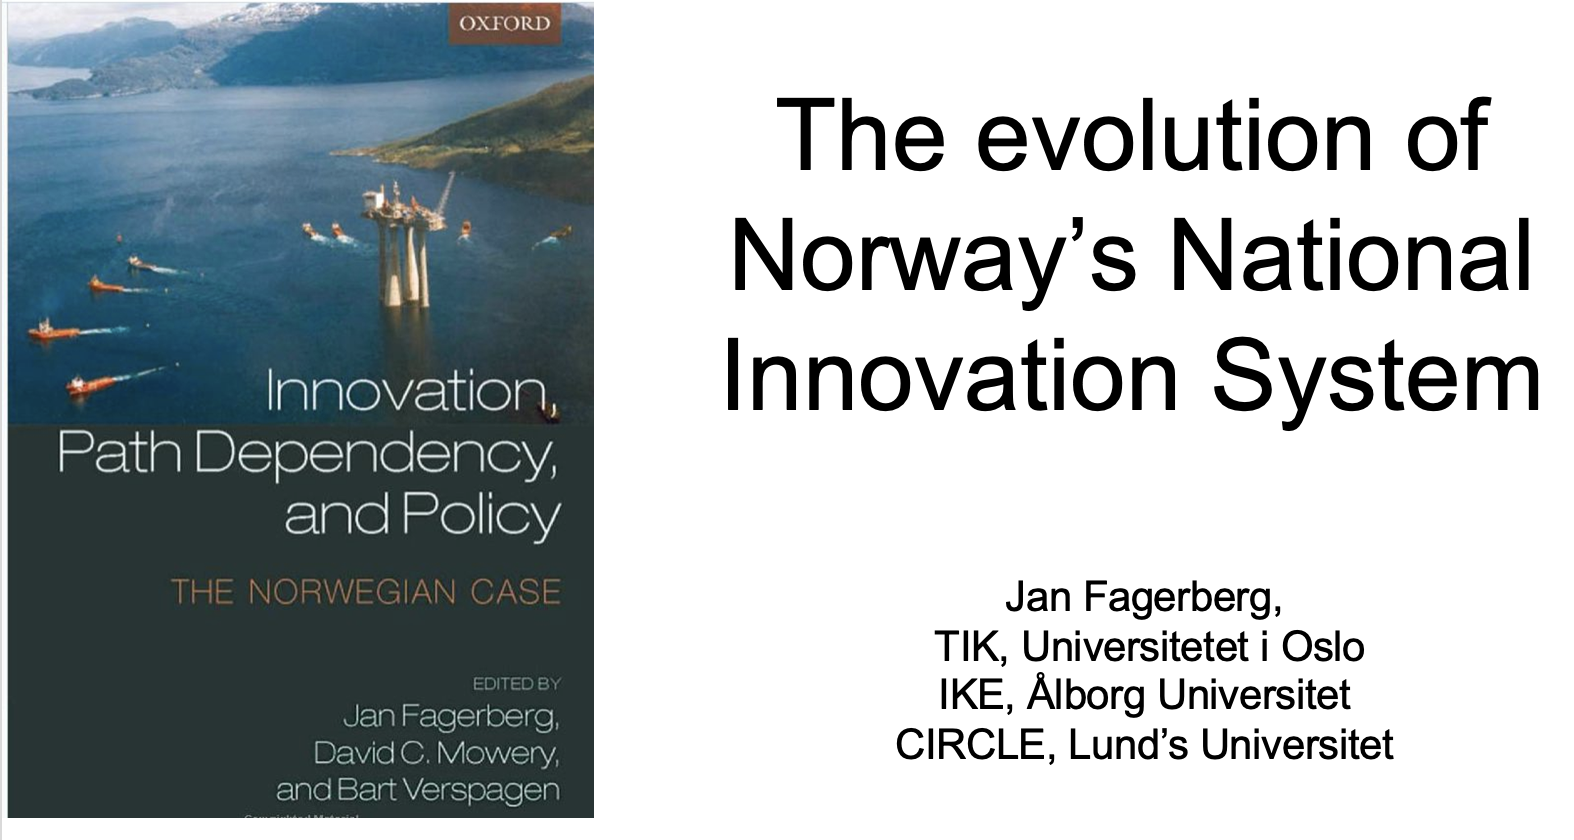 The Evolution of Norway's National Innovation System